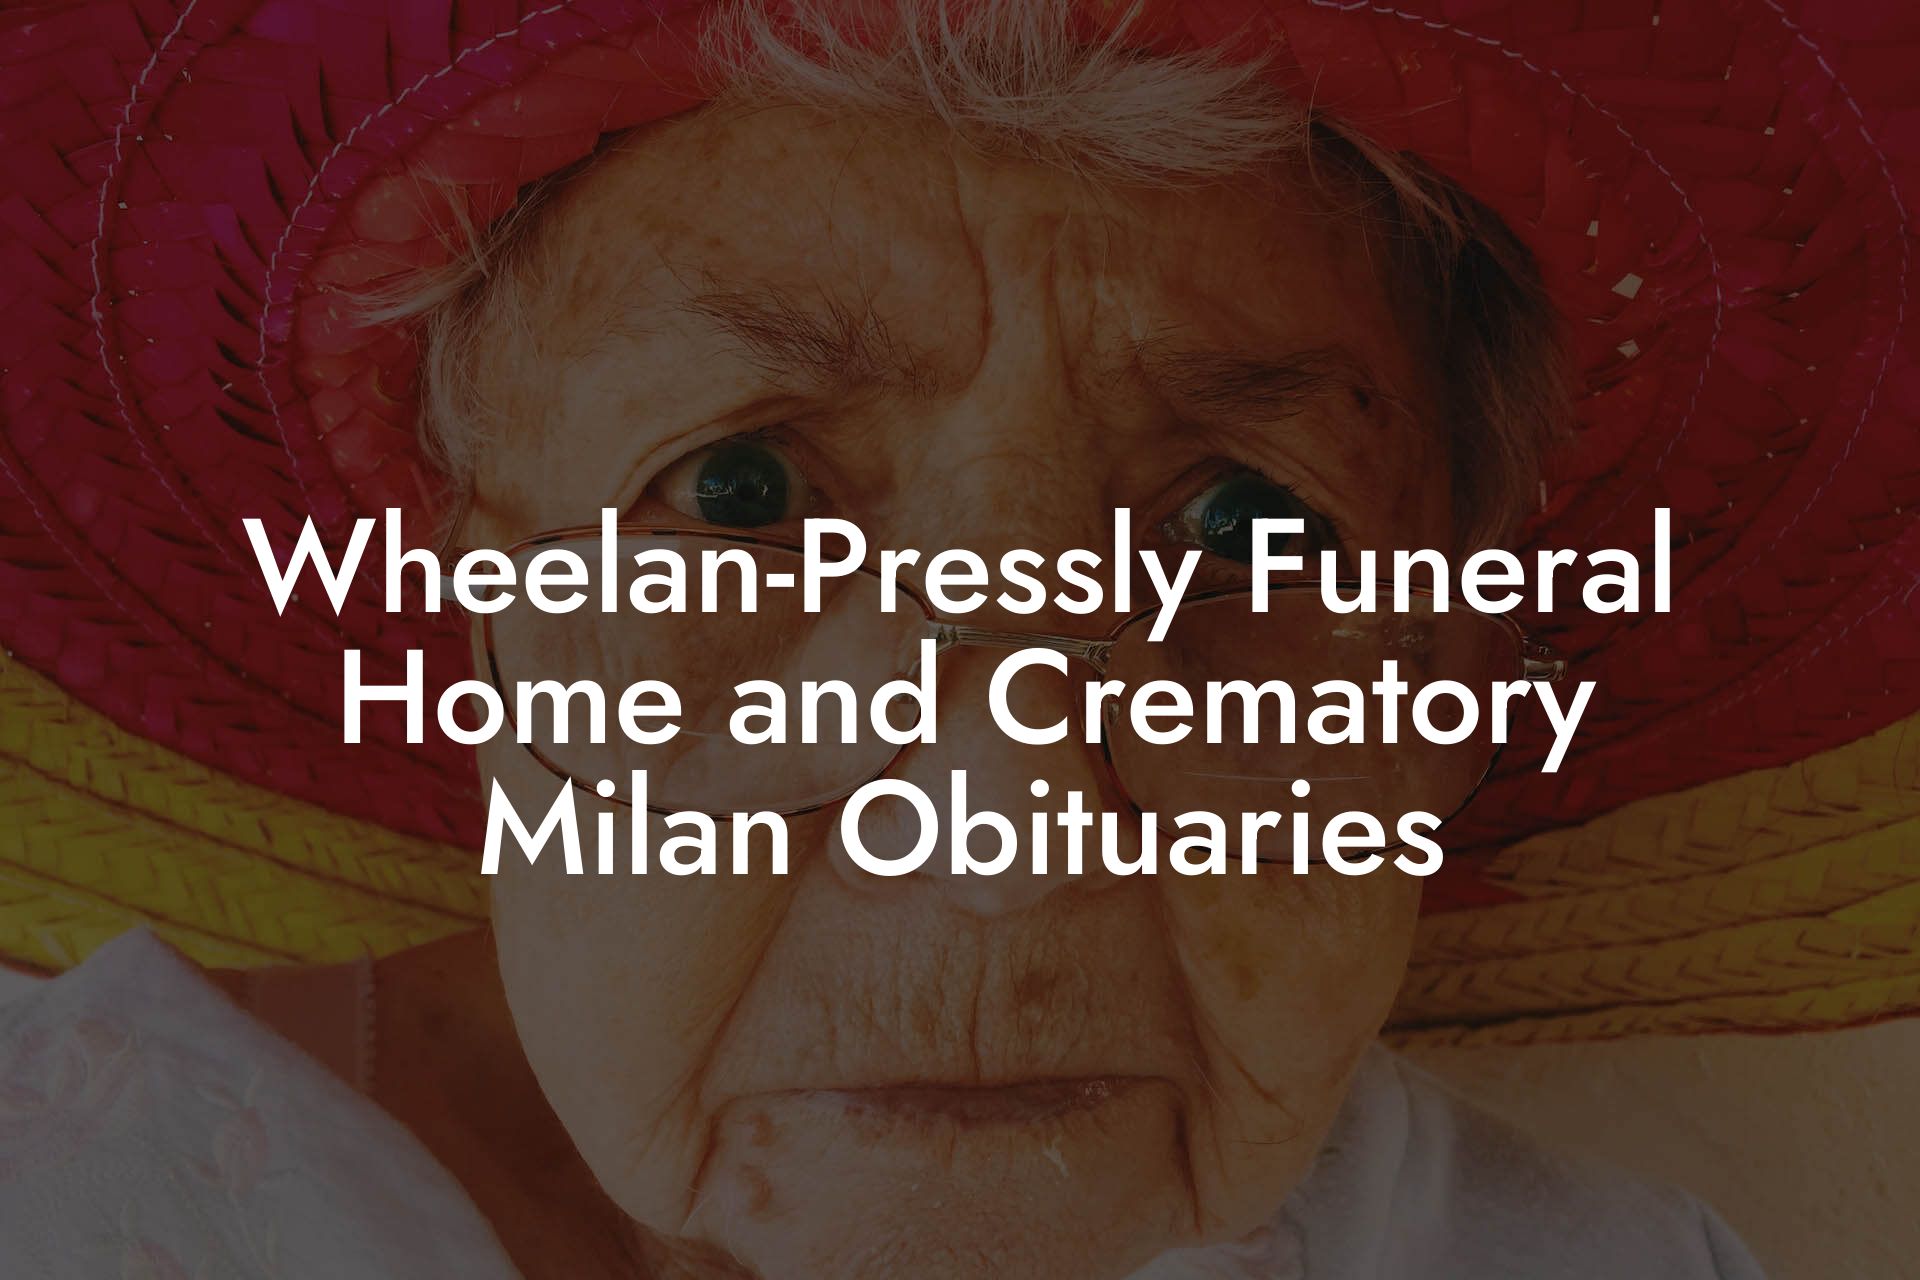 Wheelan-Pressly Funeral Home and Crematory Milan Obituaries